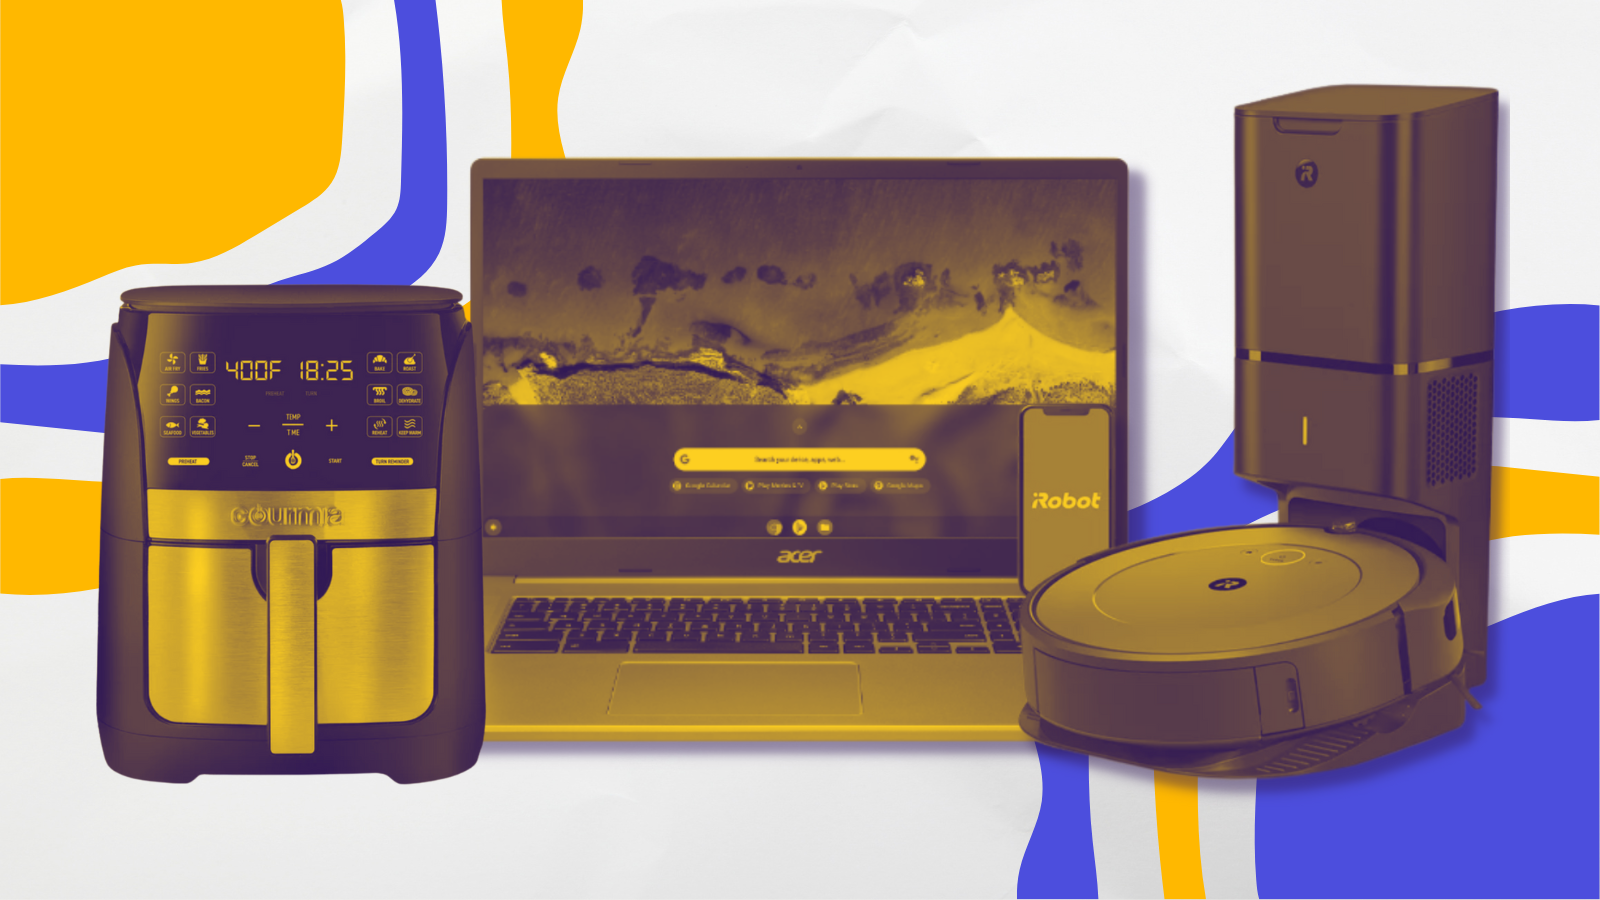 gourmia air fryer, acer 317 chromebook, and roomba i1+ robot vacuum with yellow tint in collage